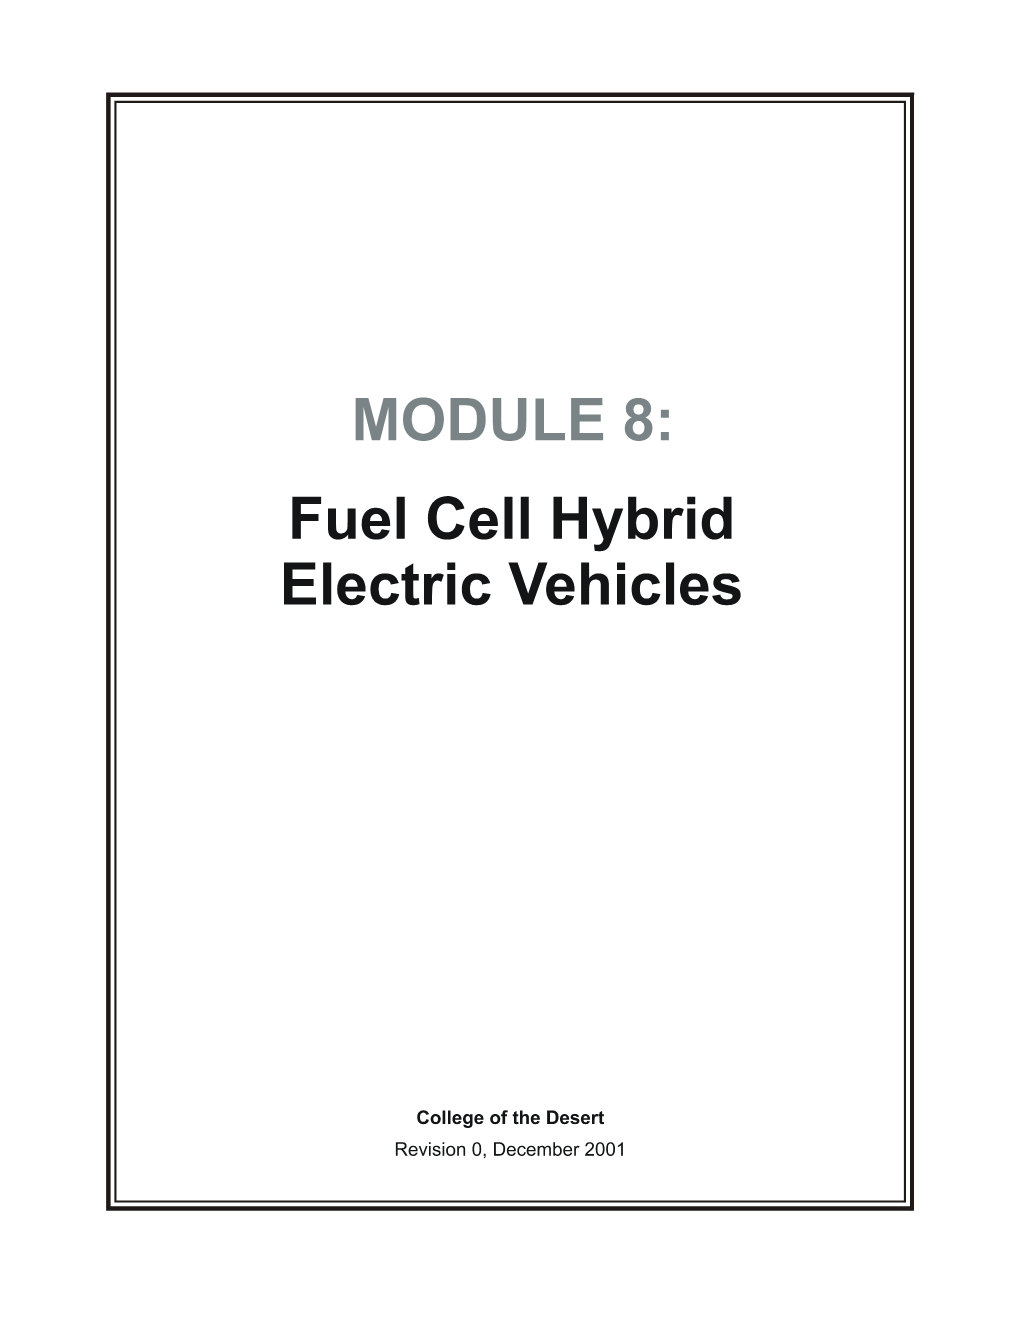 Module 8: Fuel Cell Hybrid Electric Vehicles